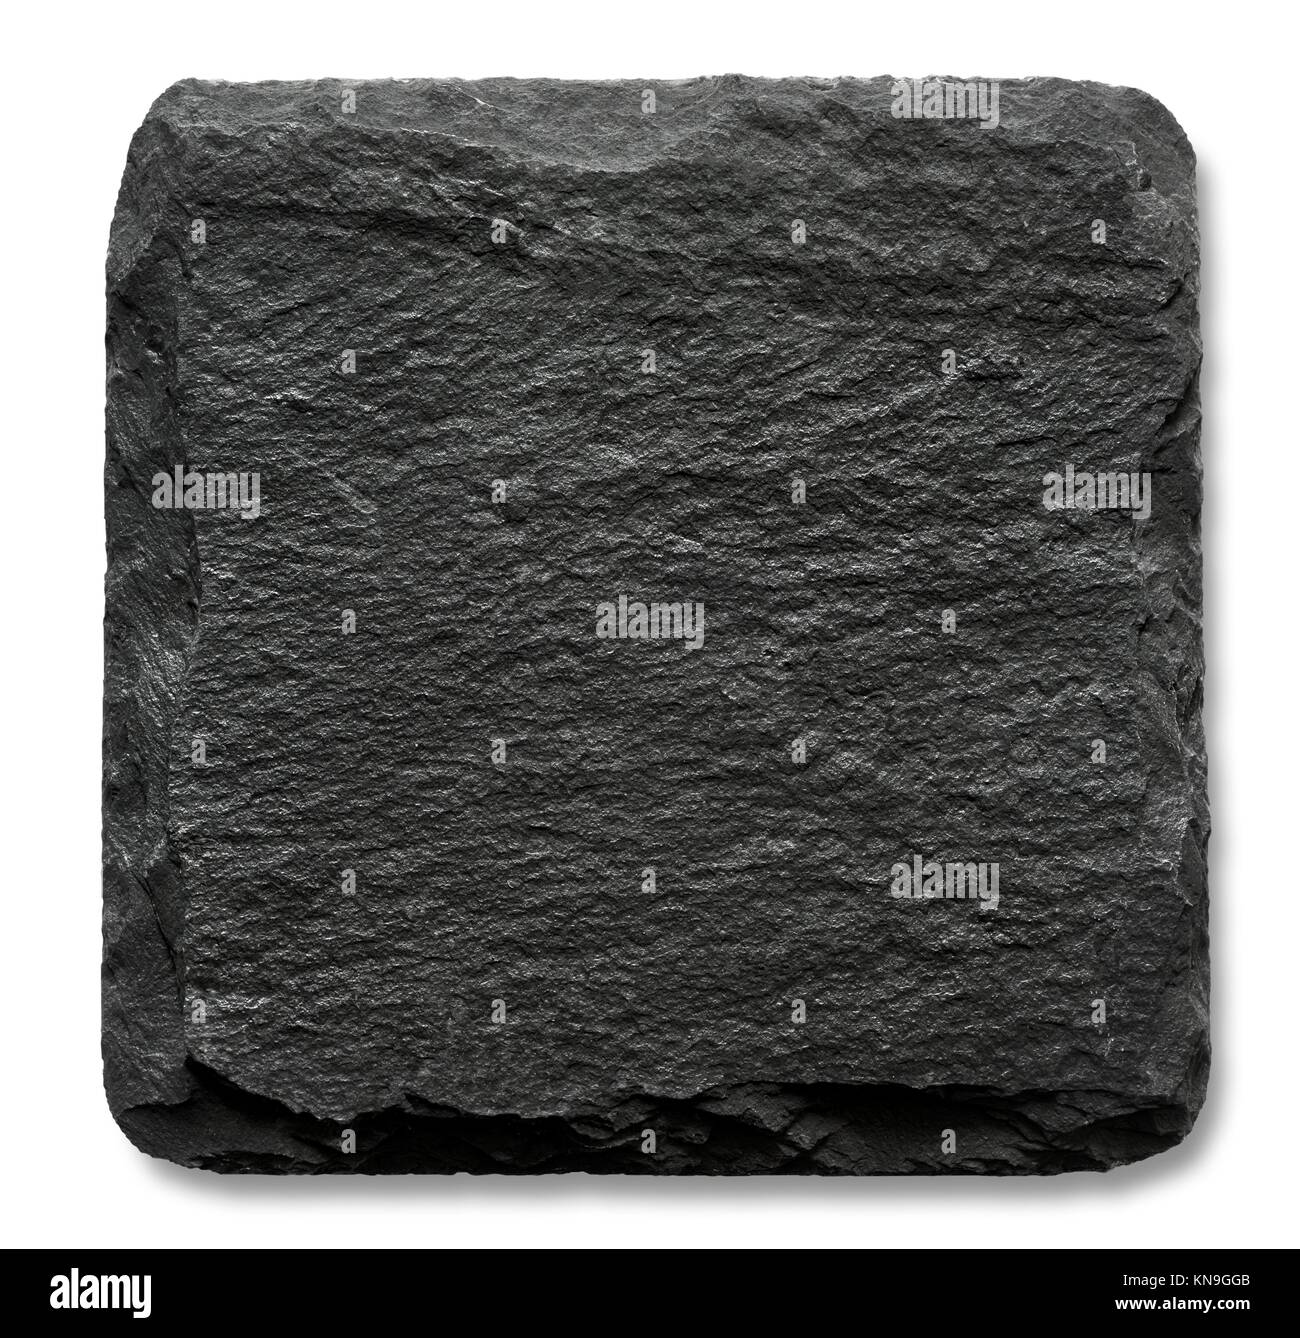 Square slate stand isolated on a white background. Stock Photo